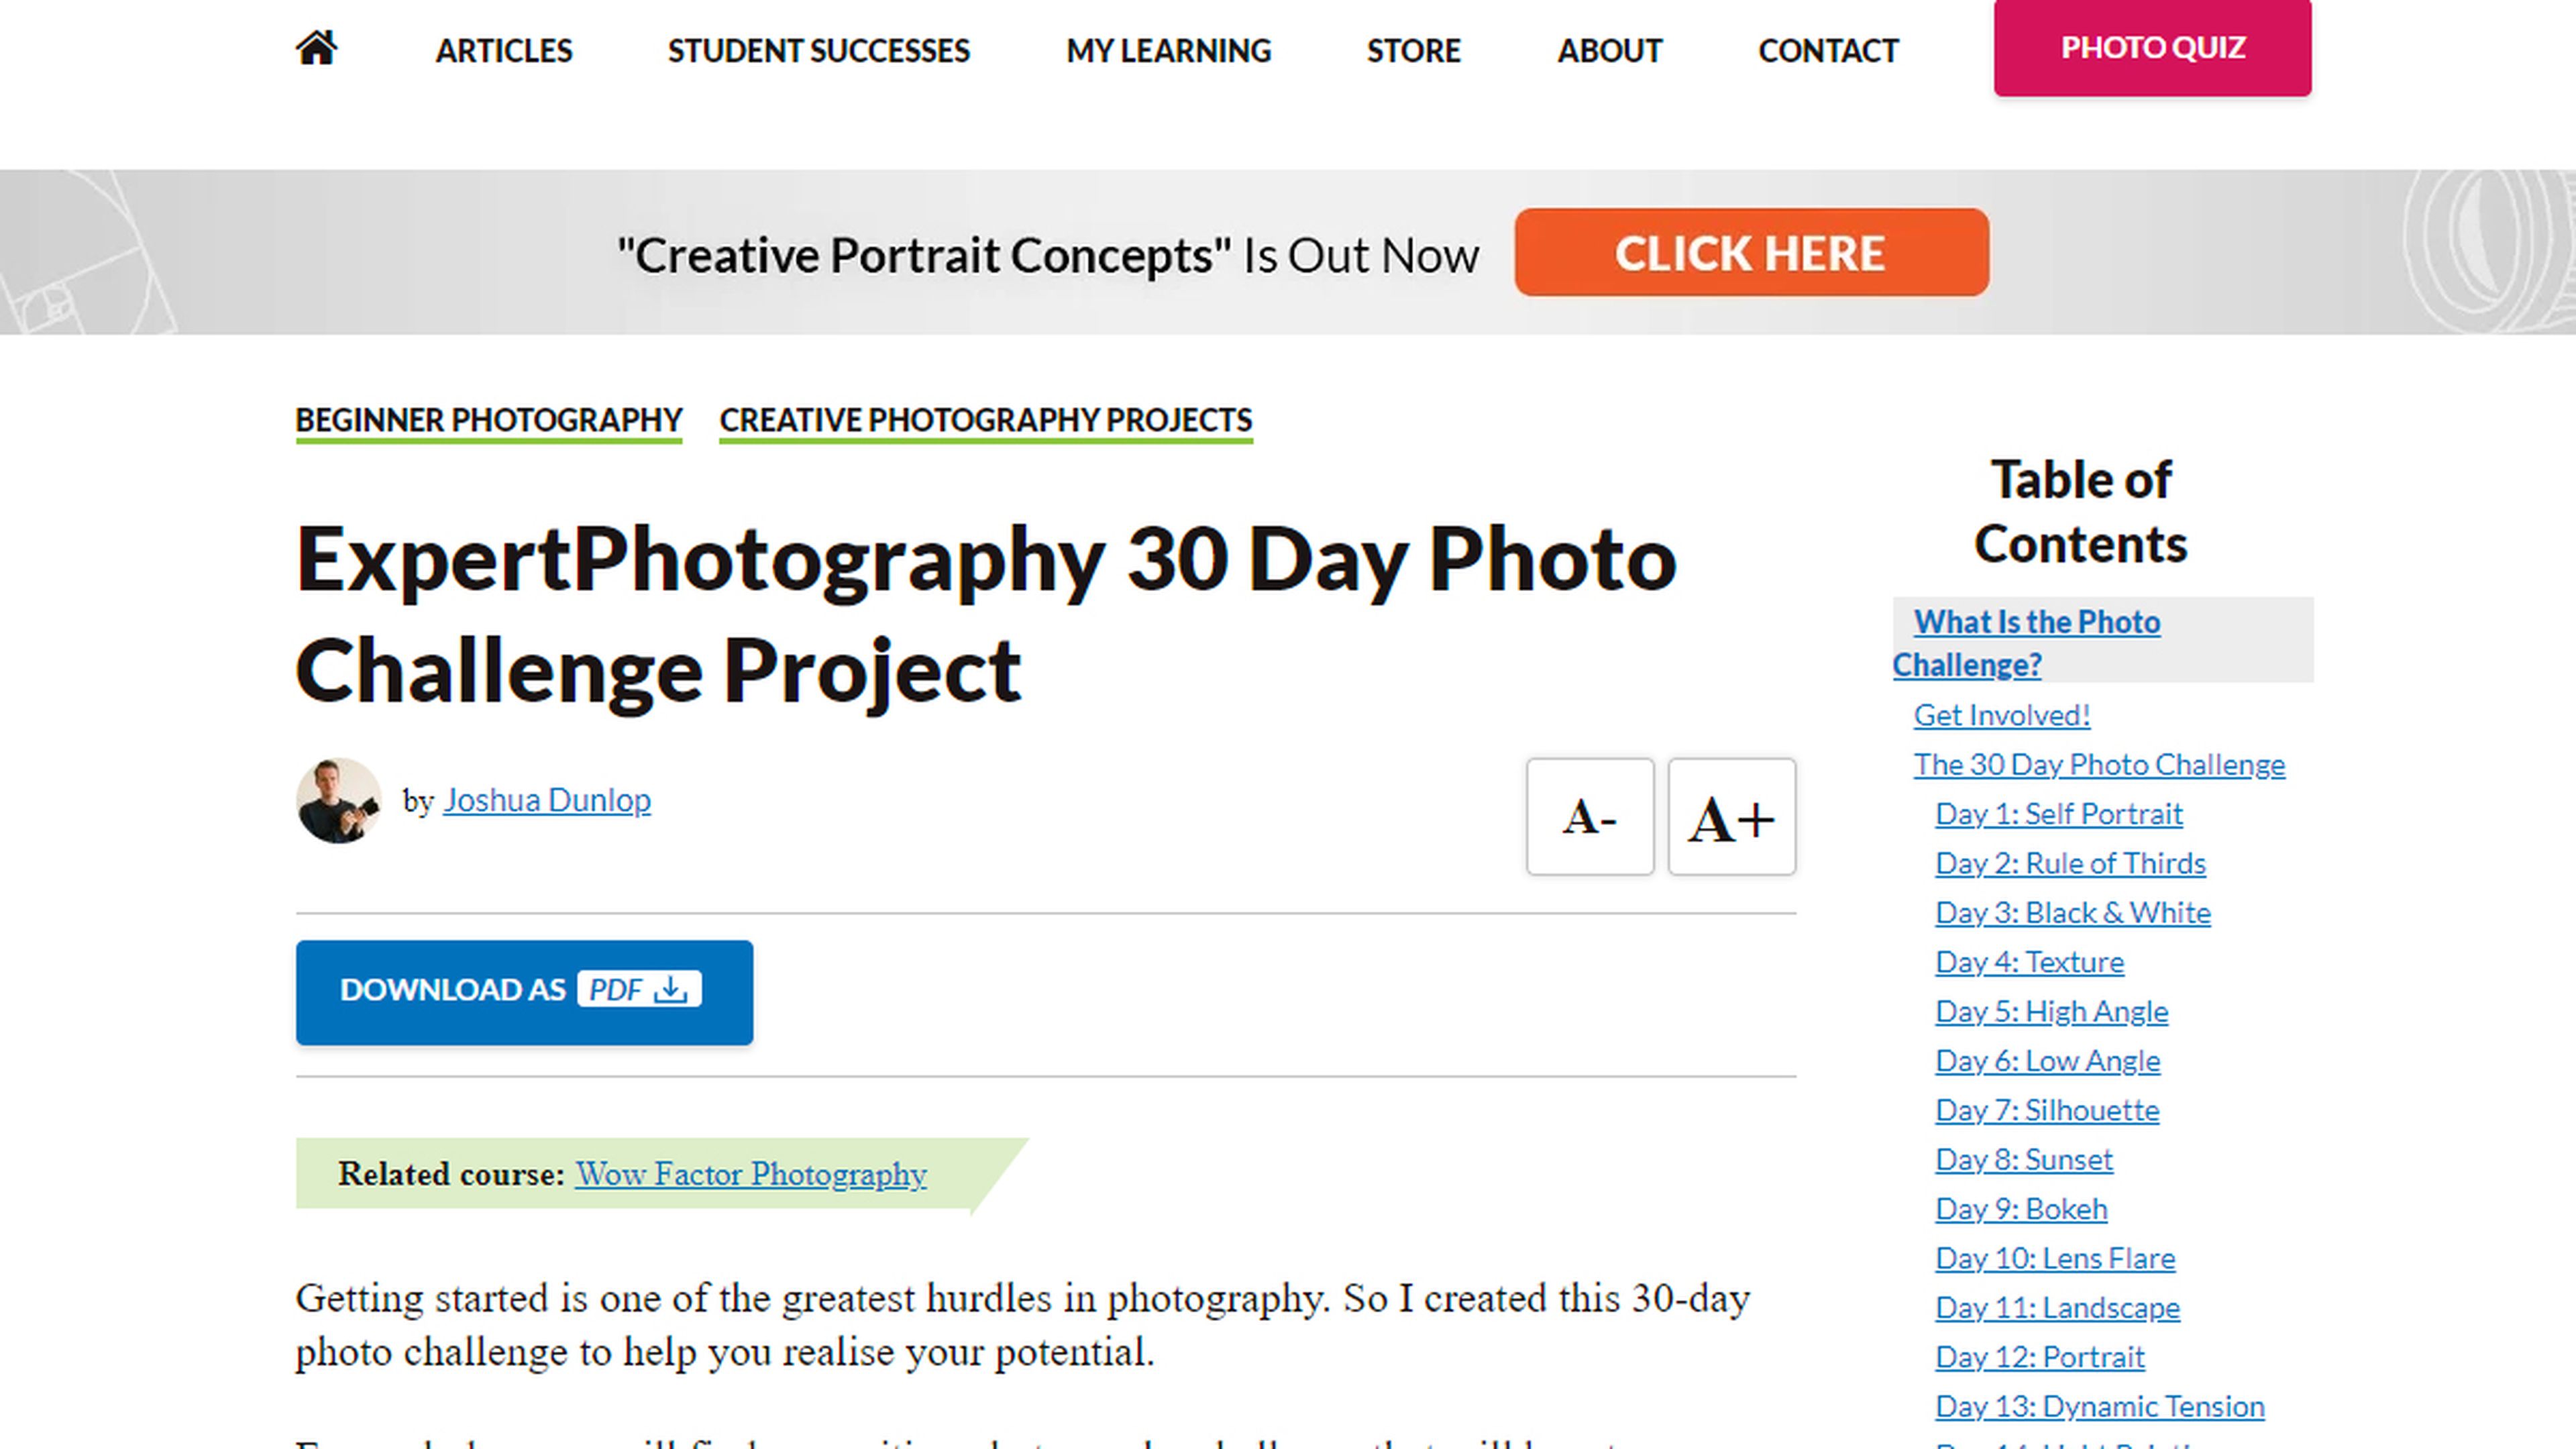 ExpertPhotography 30 Day Photo Challenge